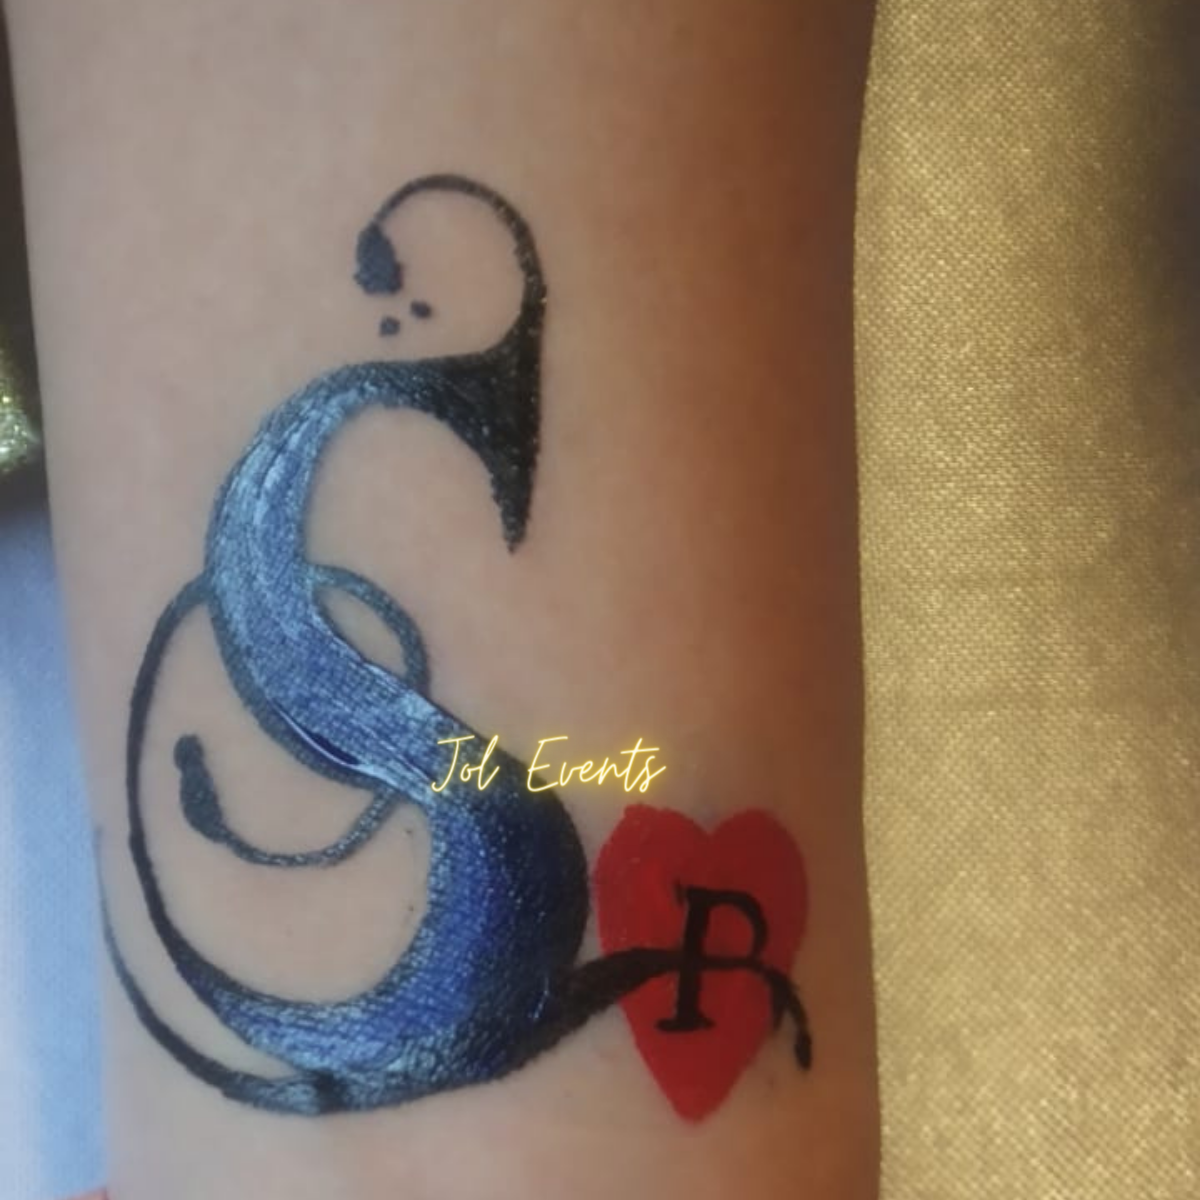 How to make Beautiful S letter Tattoo - YouTube